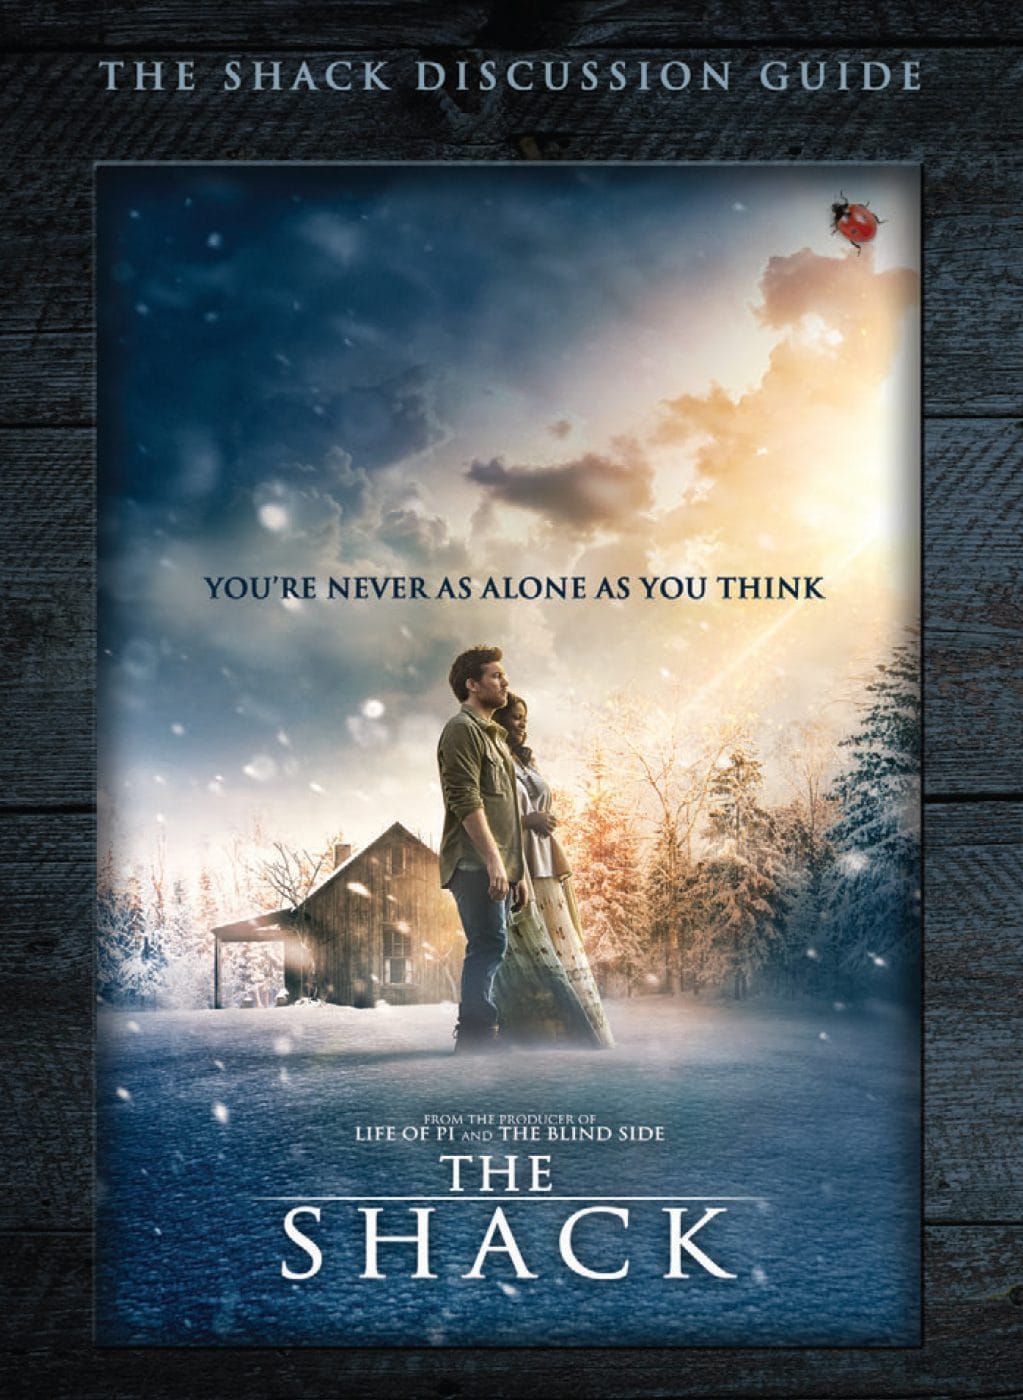 the shack_discussion guide